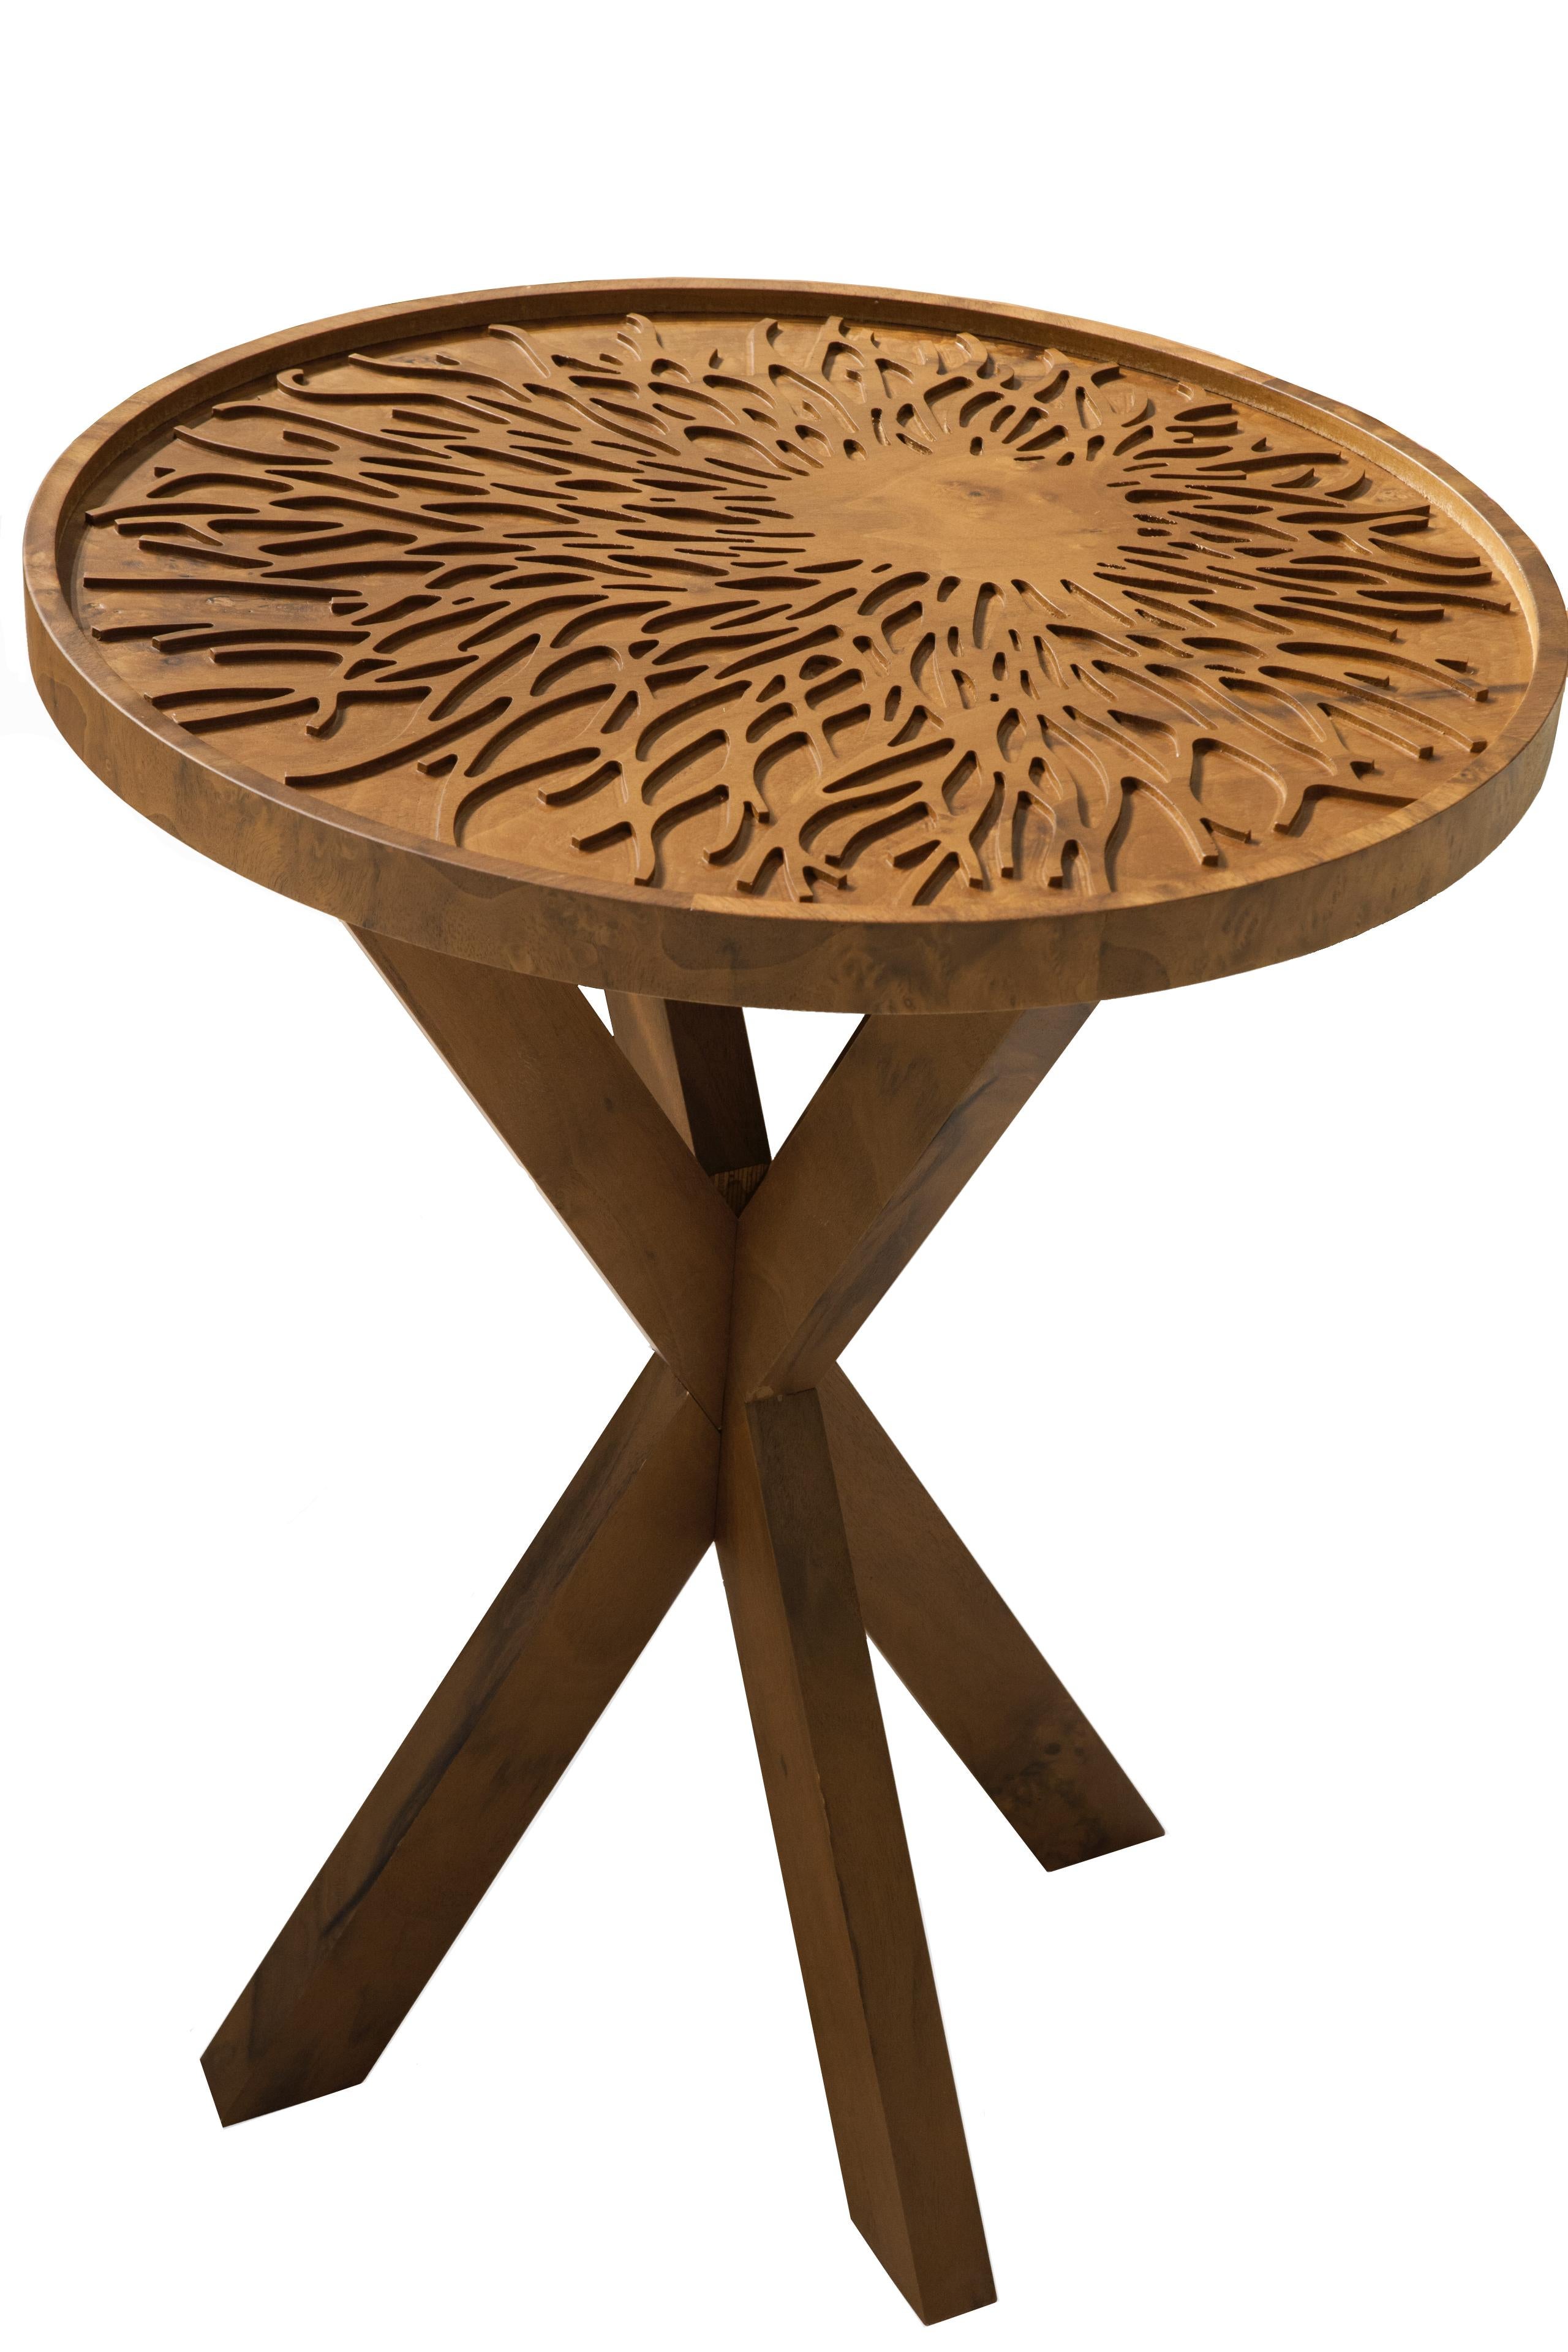 Solid wood intricately engraved with Sisli’s signature branches makes this side table an artful addition to any seating area.